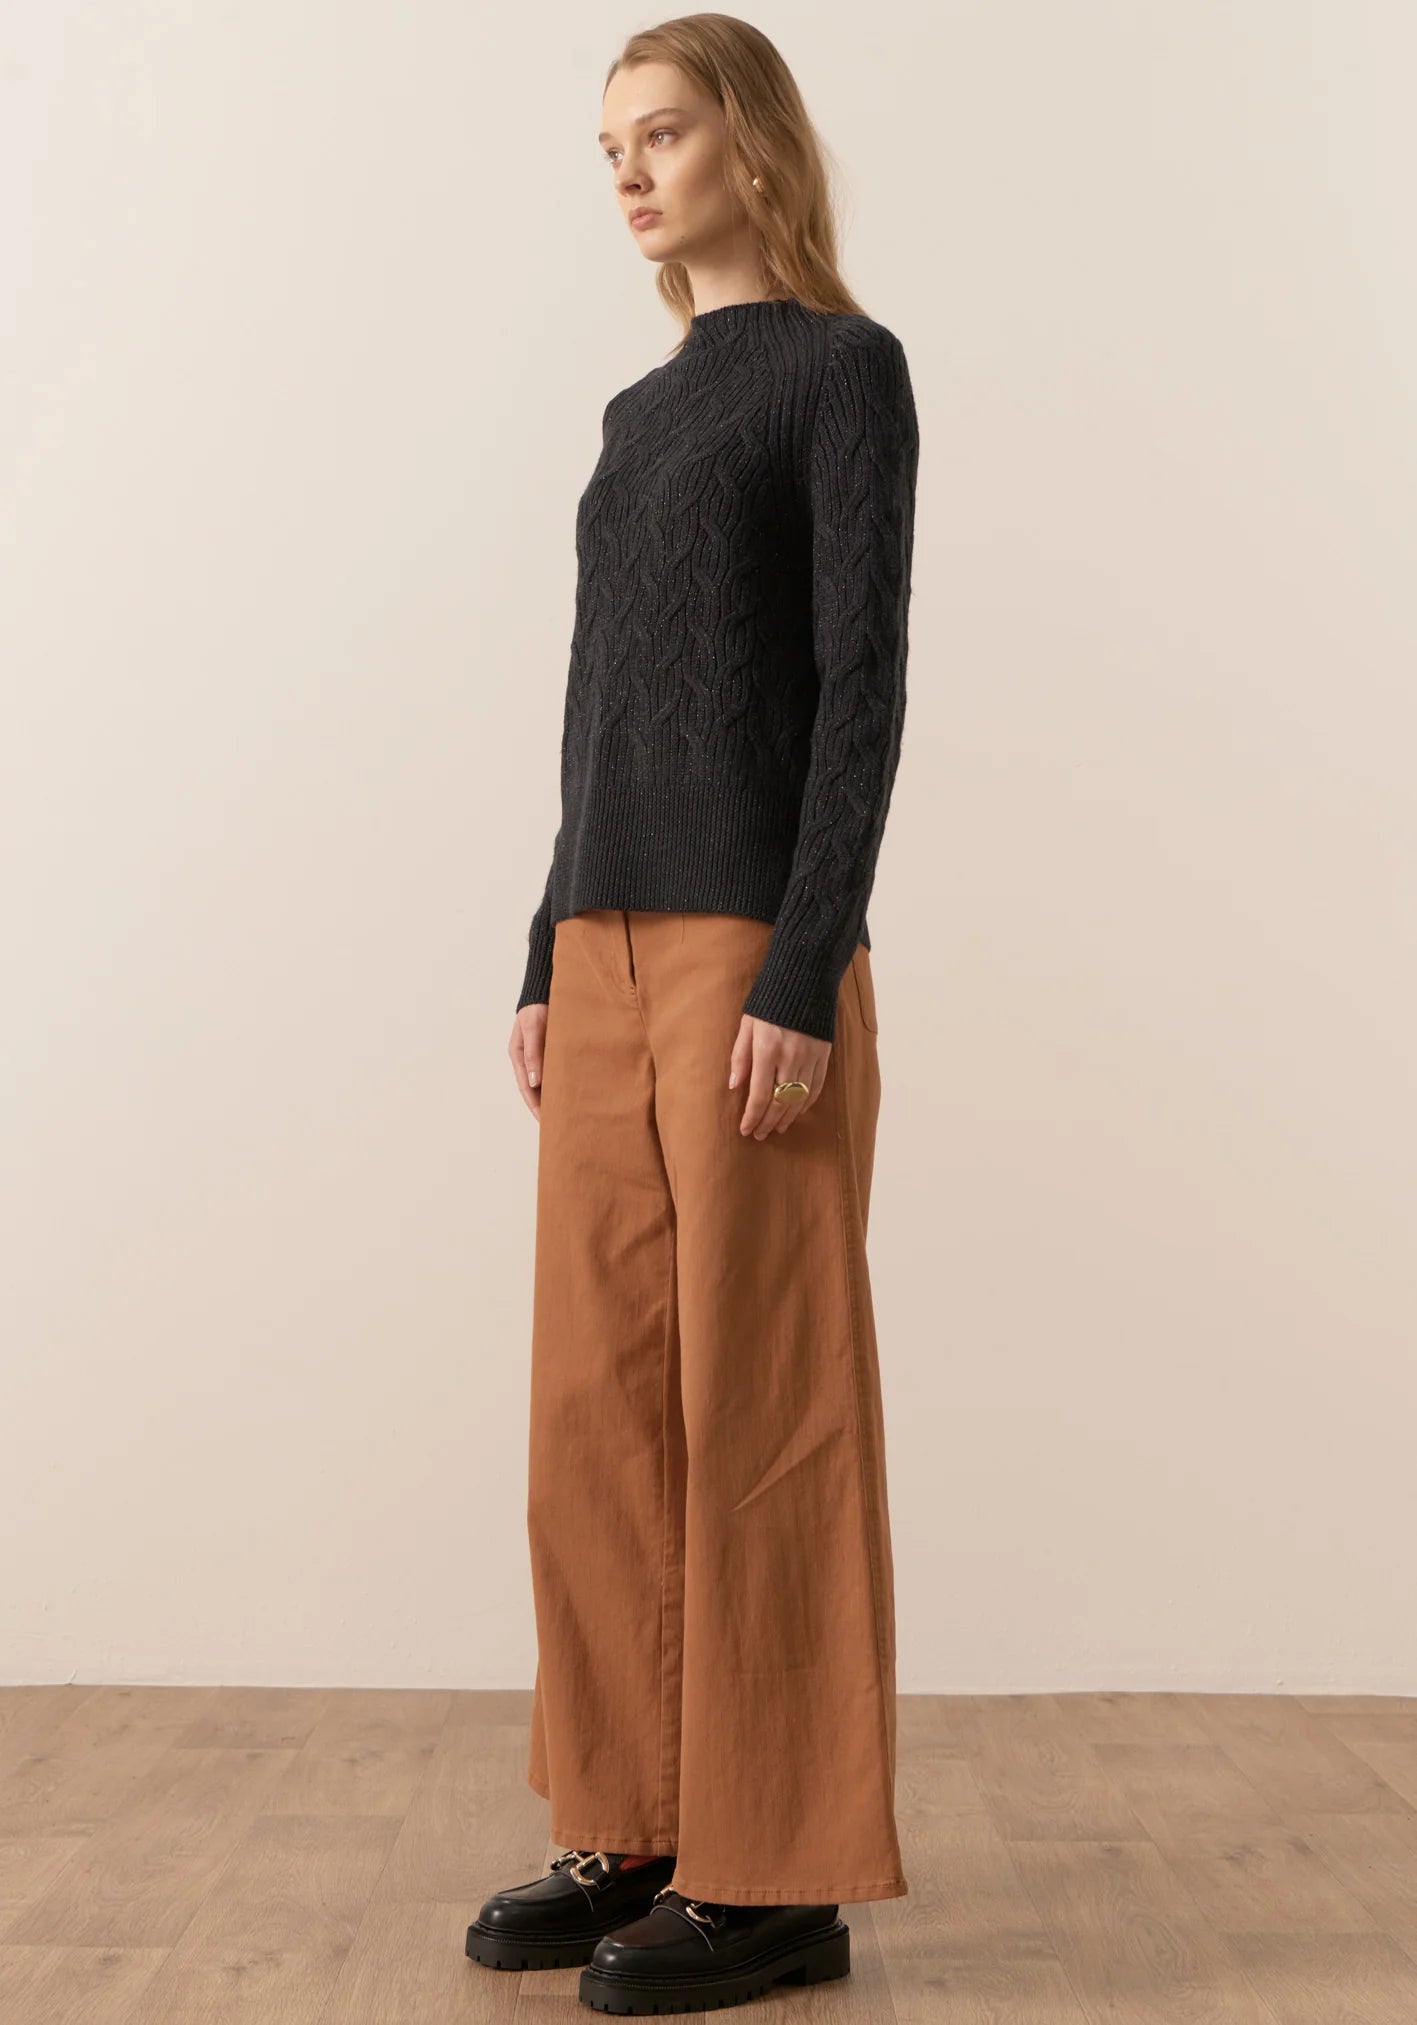 Bennet Lurex Cable Knit | Charcoal